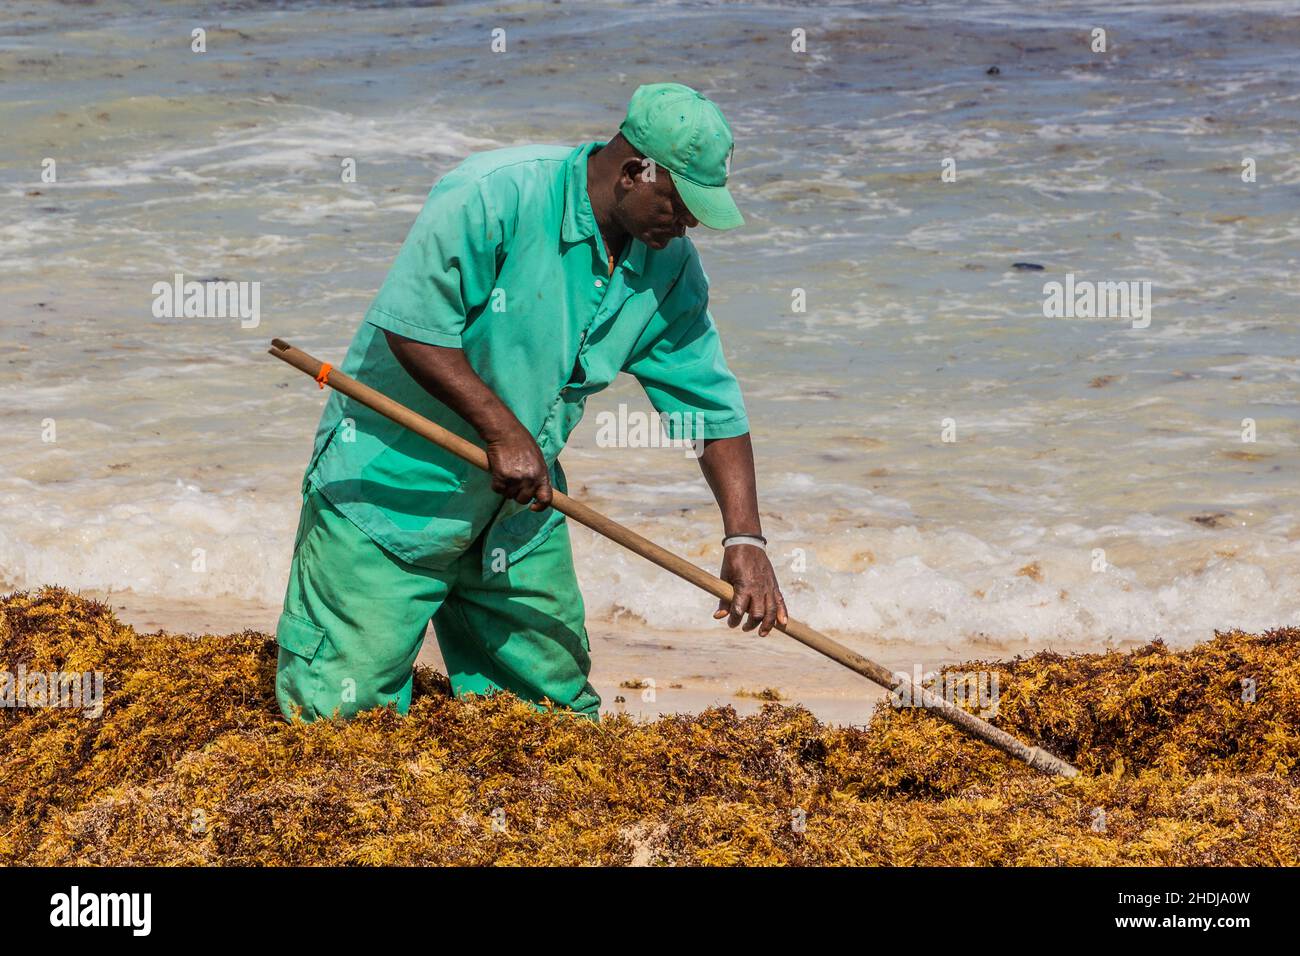 PUNTA CANA, DOMINICAN REPUBLIC - DECEMBER 8, 2018: Workers clean seaweed at Bavaro beach, Dominican Republic Stock Photo